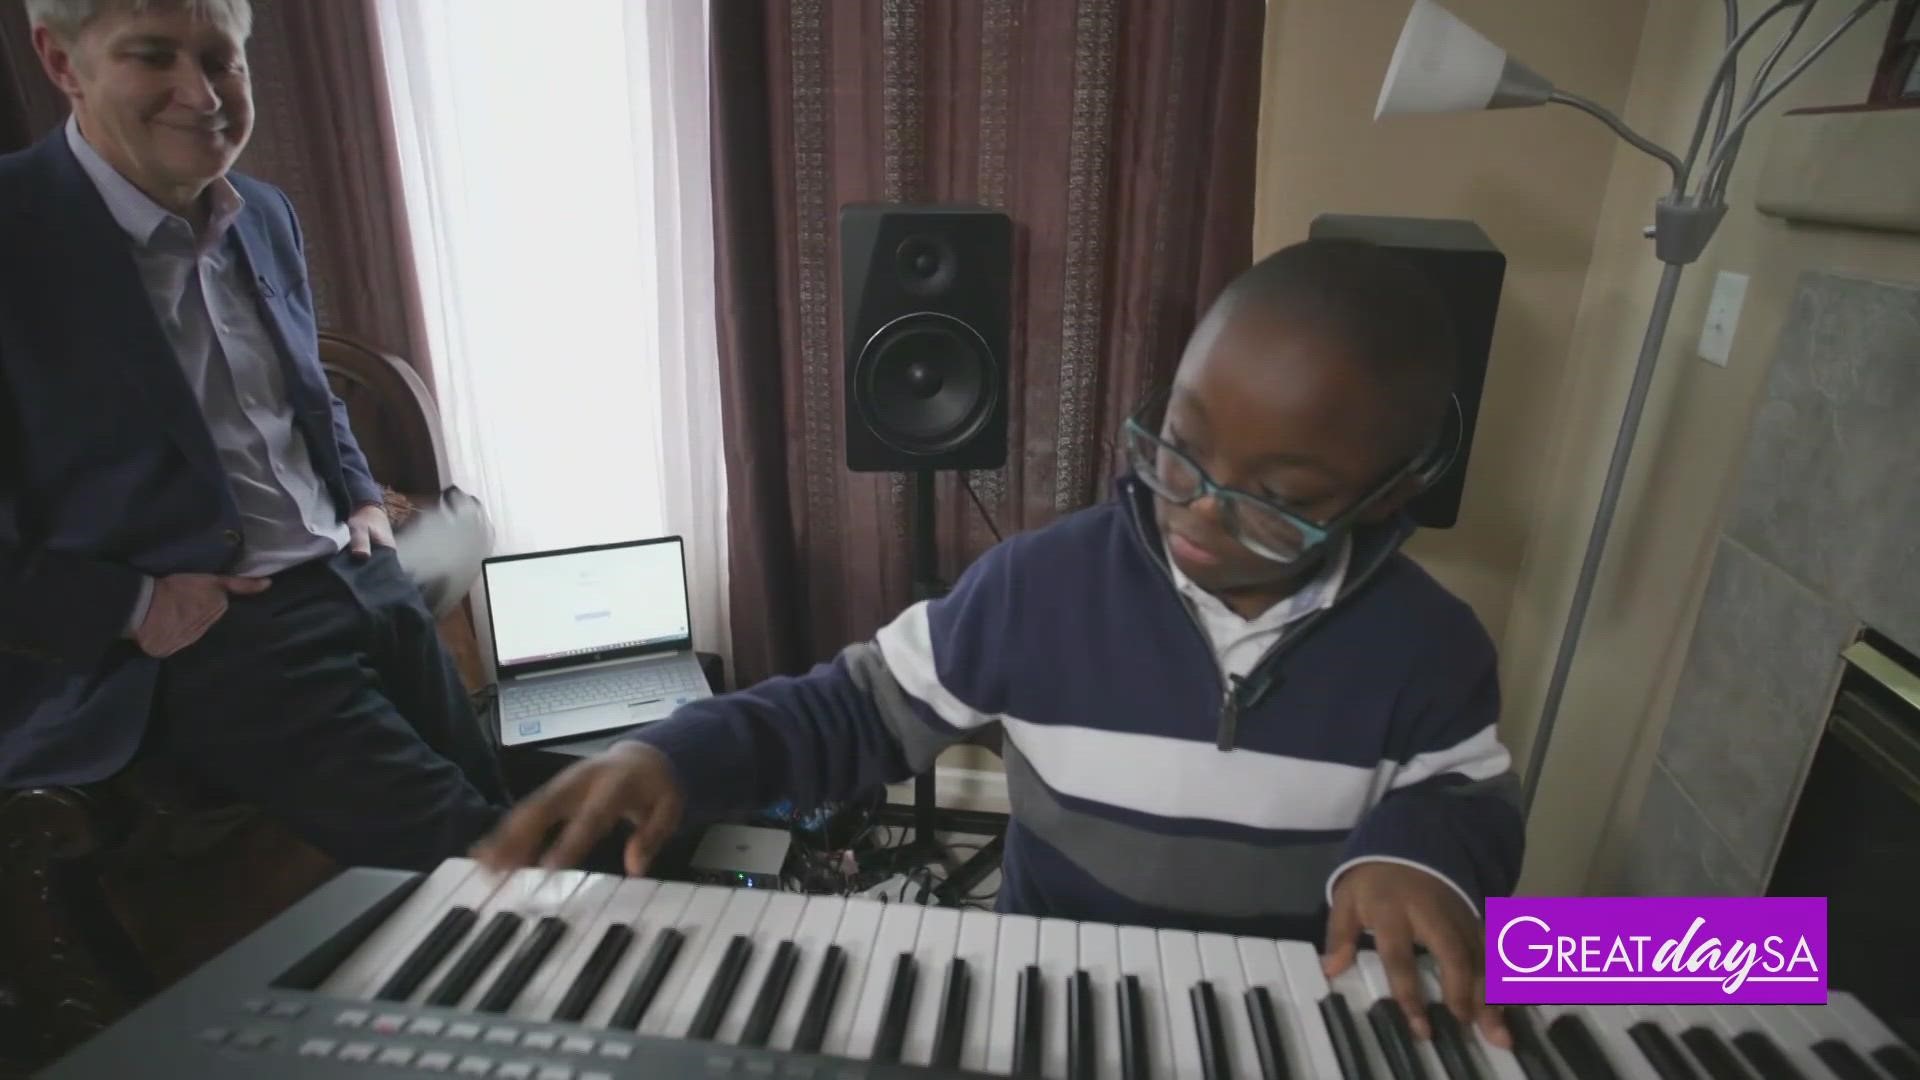 An 11-year-old music prodigy receives a special gift from an unconventional friend.